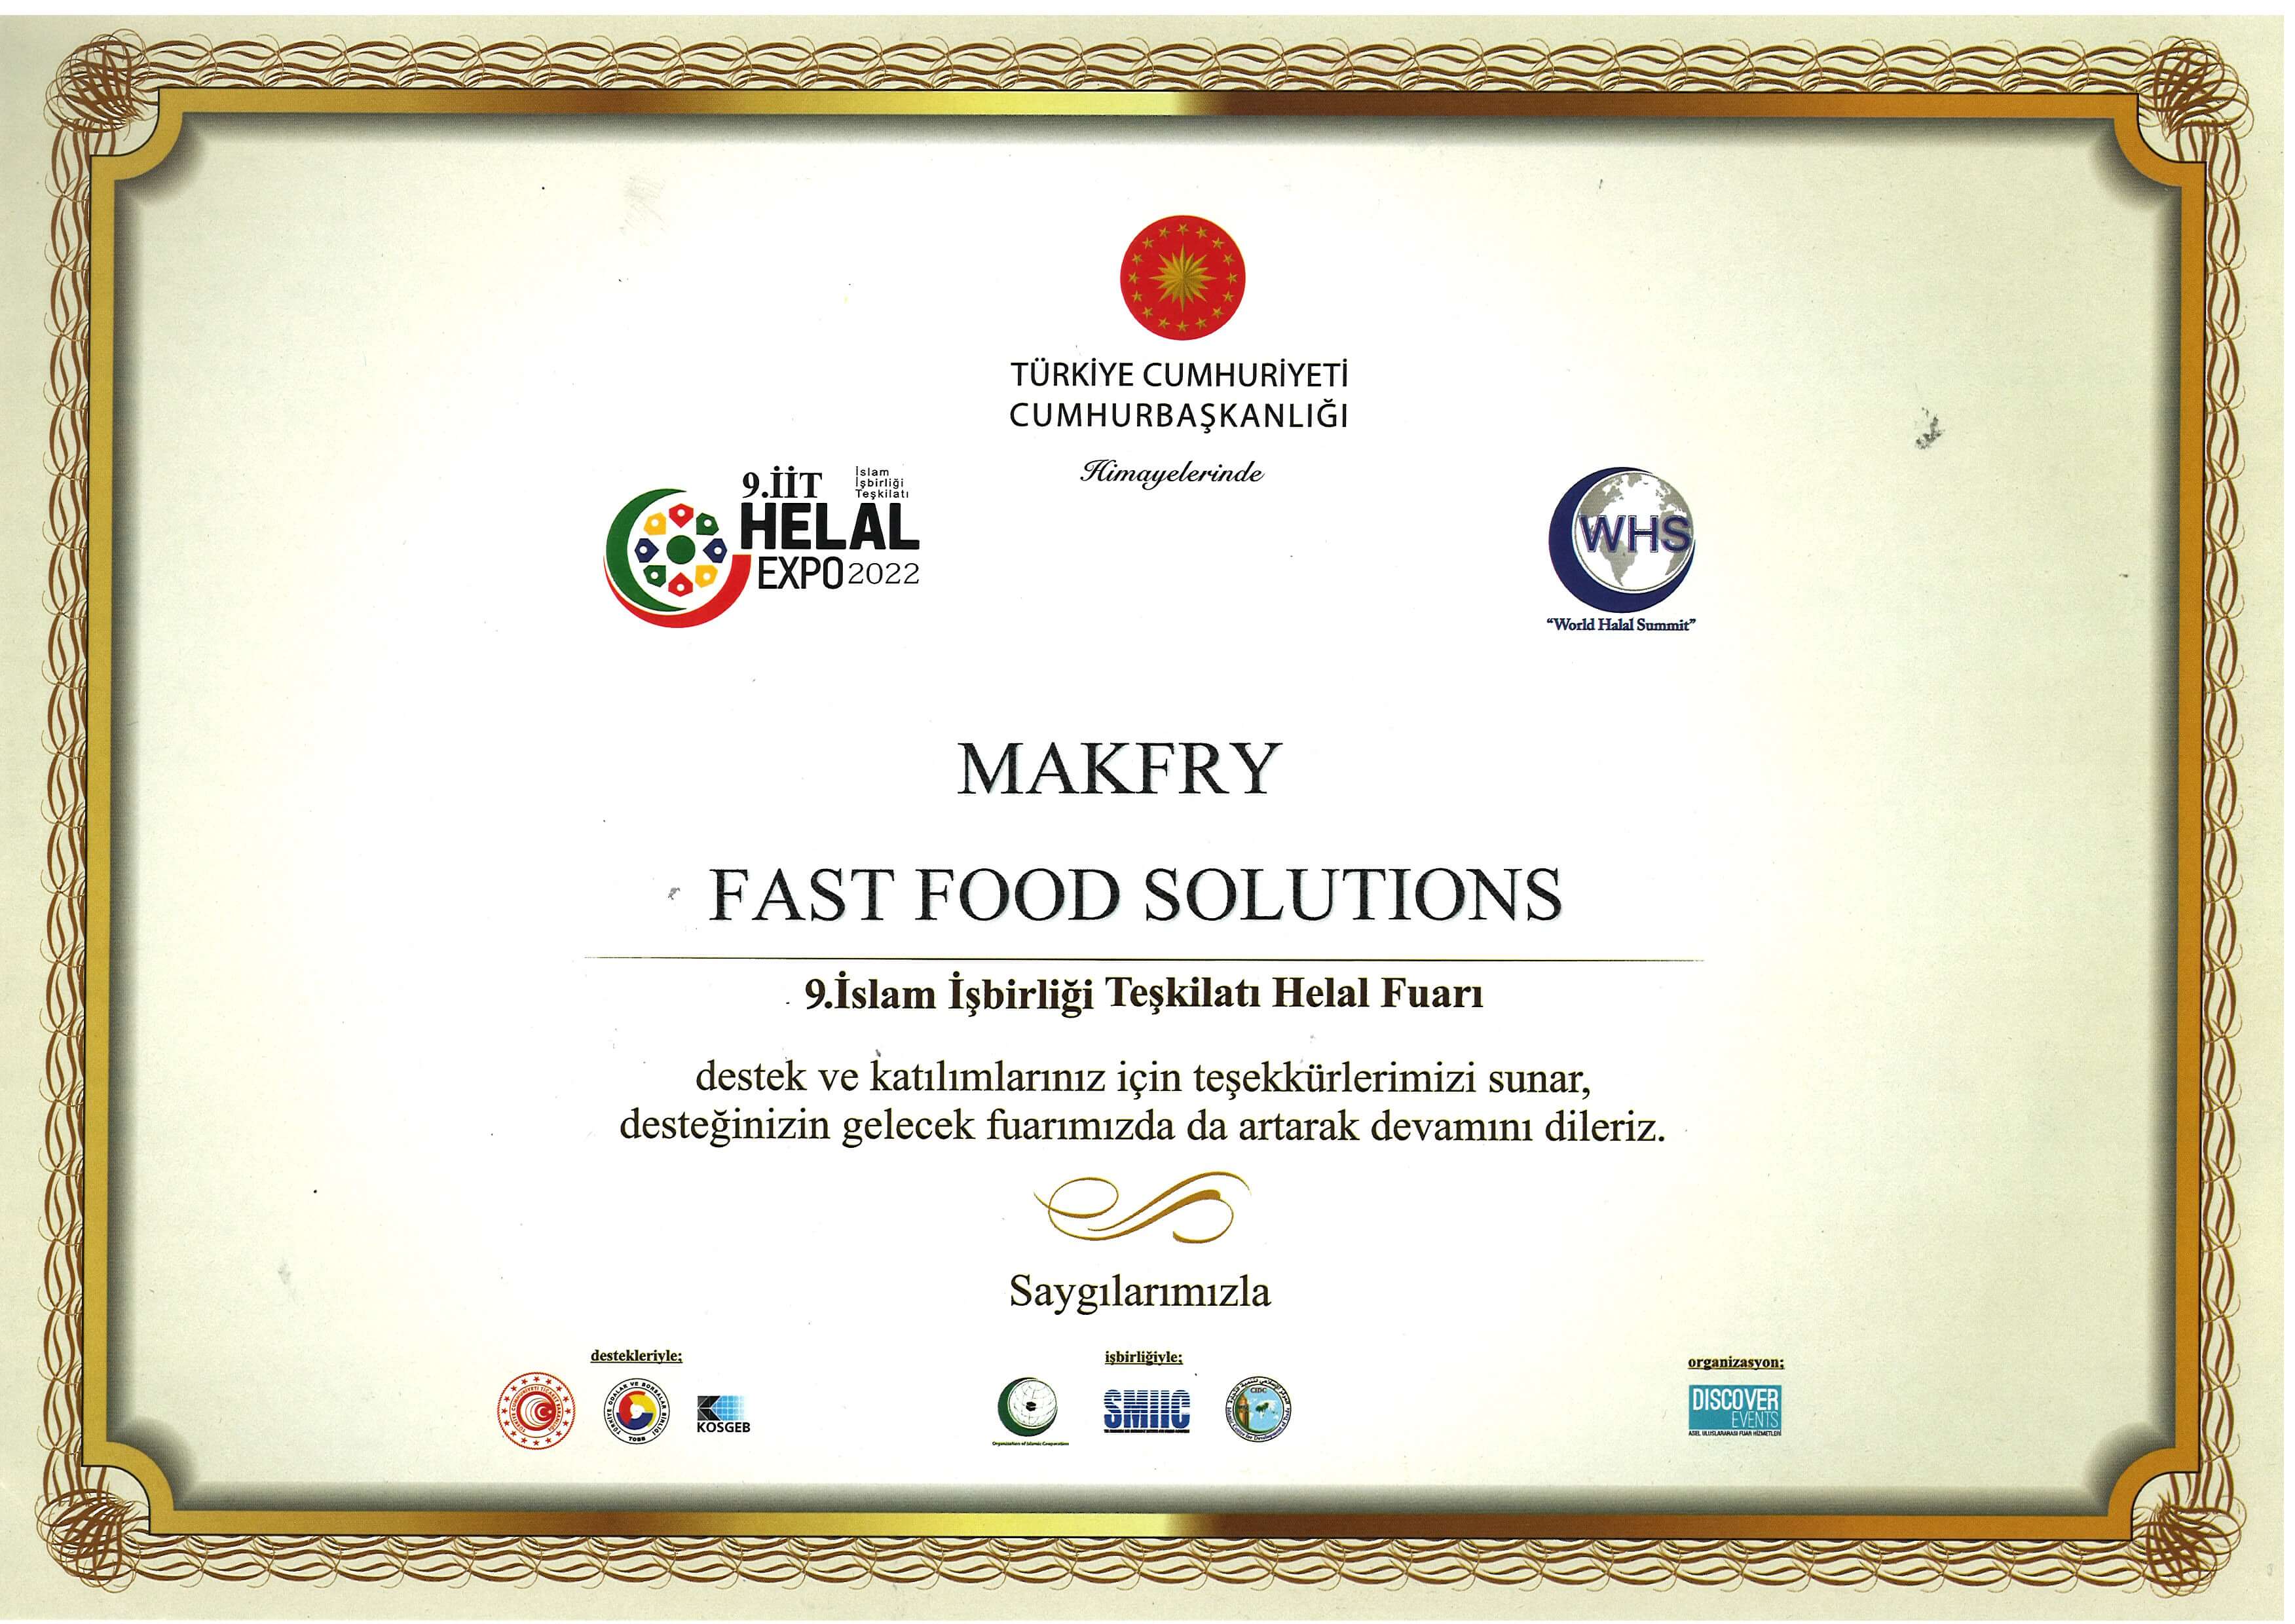 We participated in the Islamic Cooperation Organization Halal Fair.